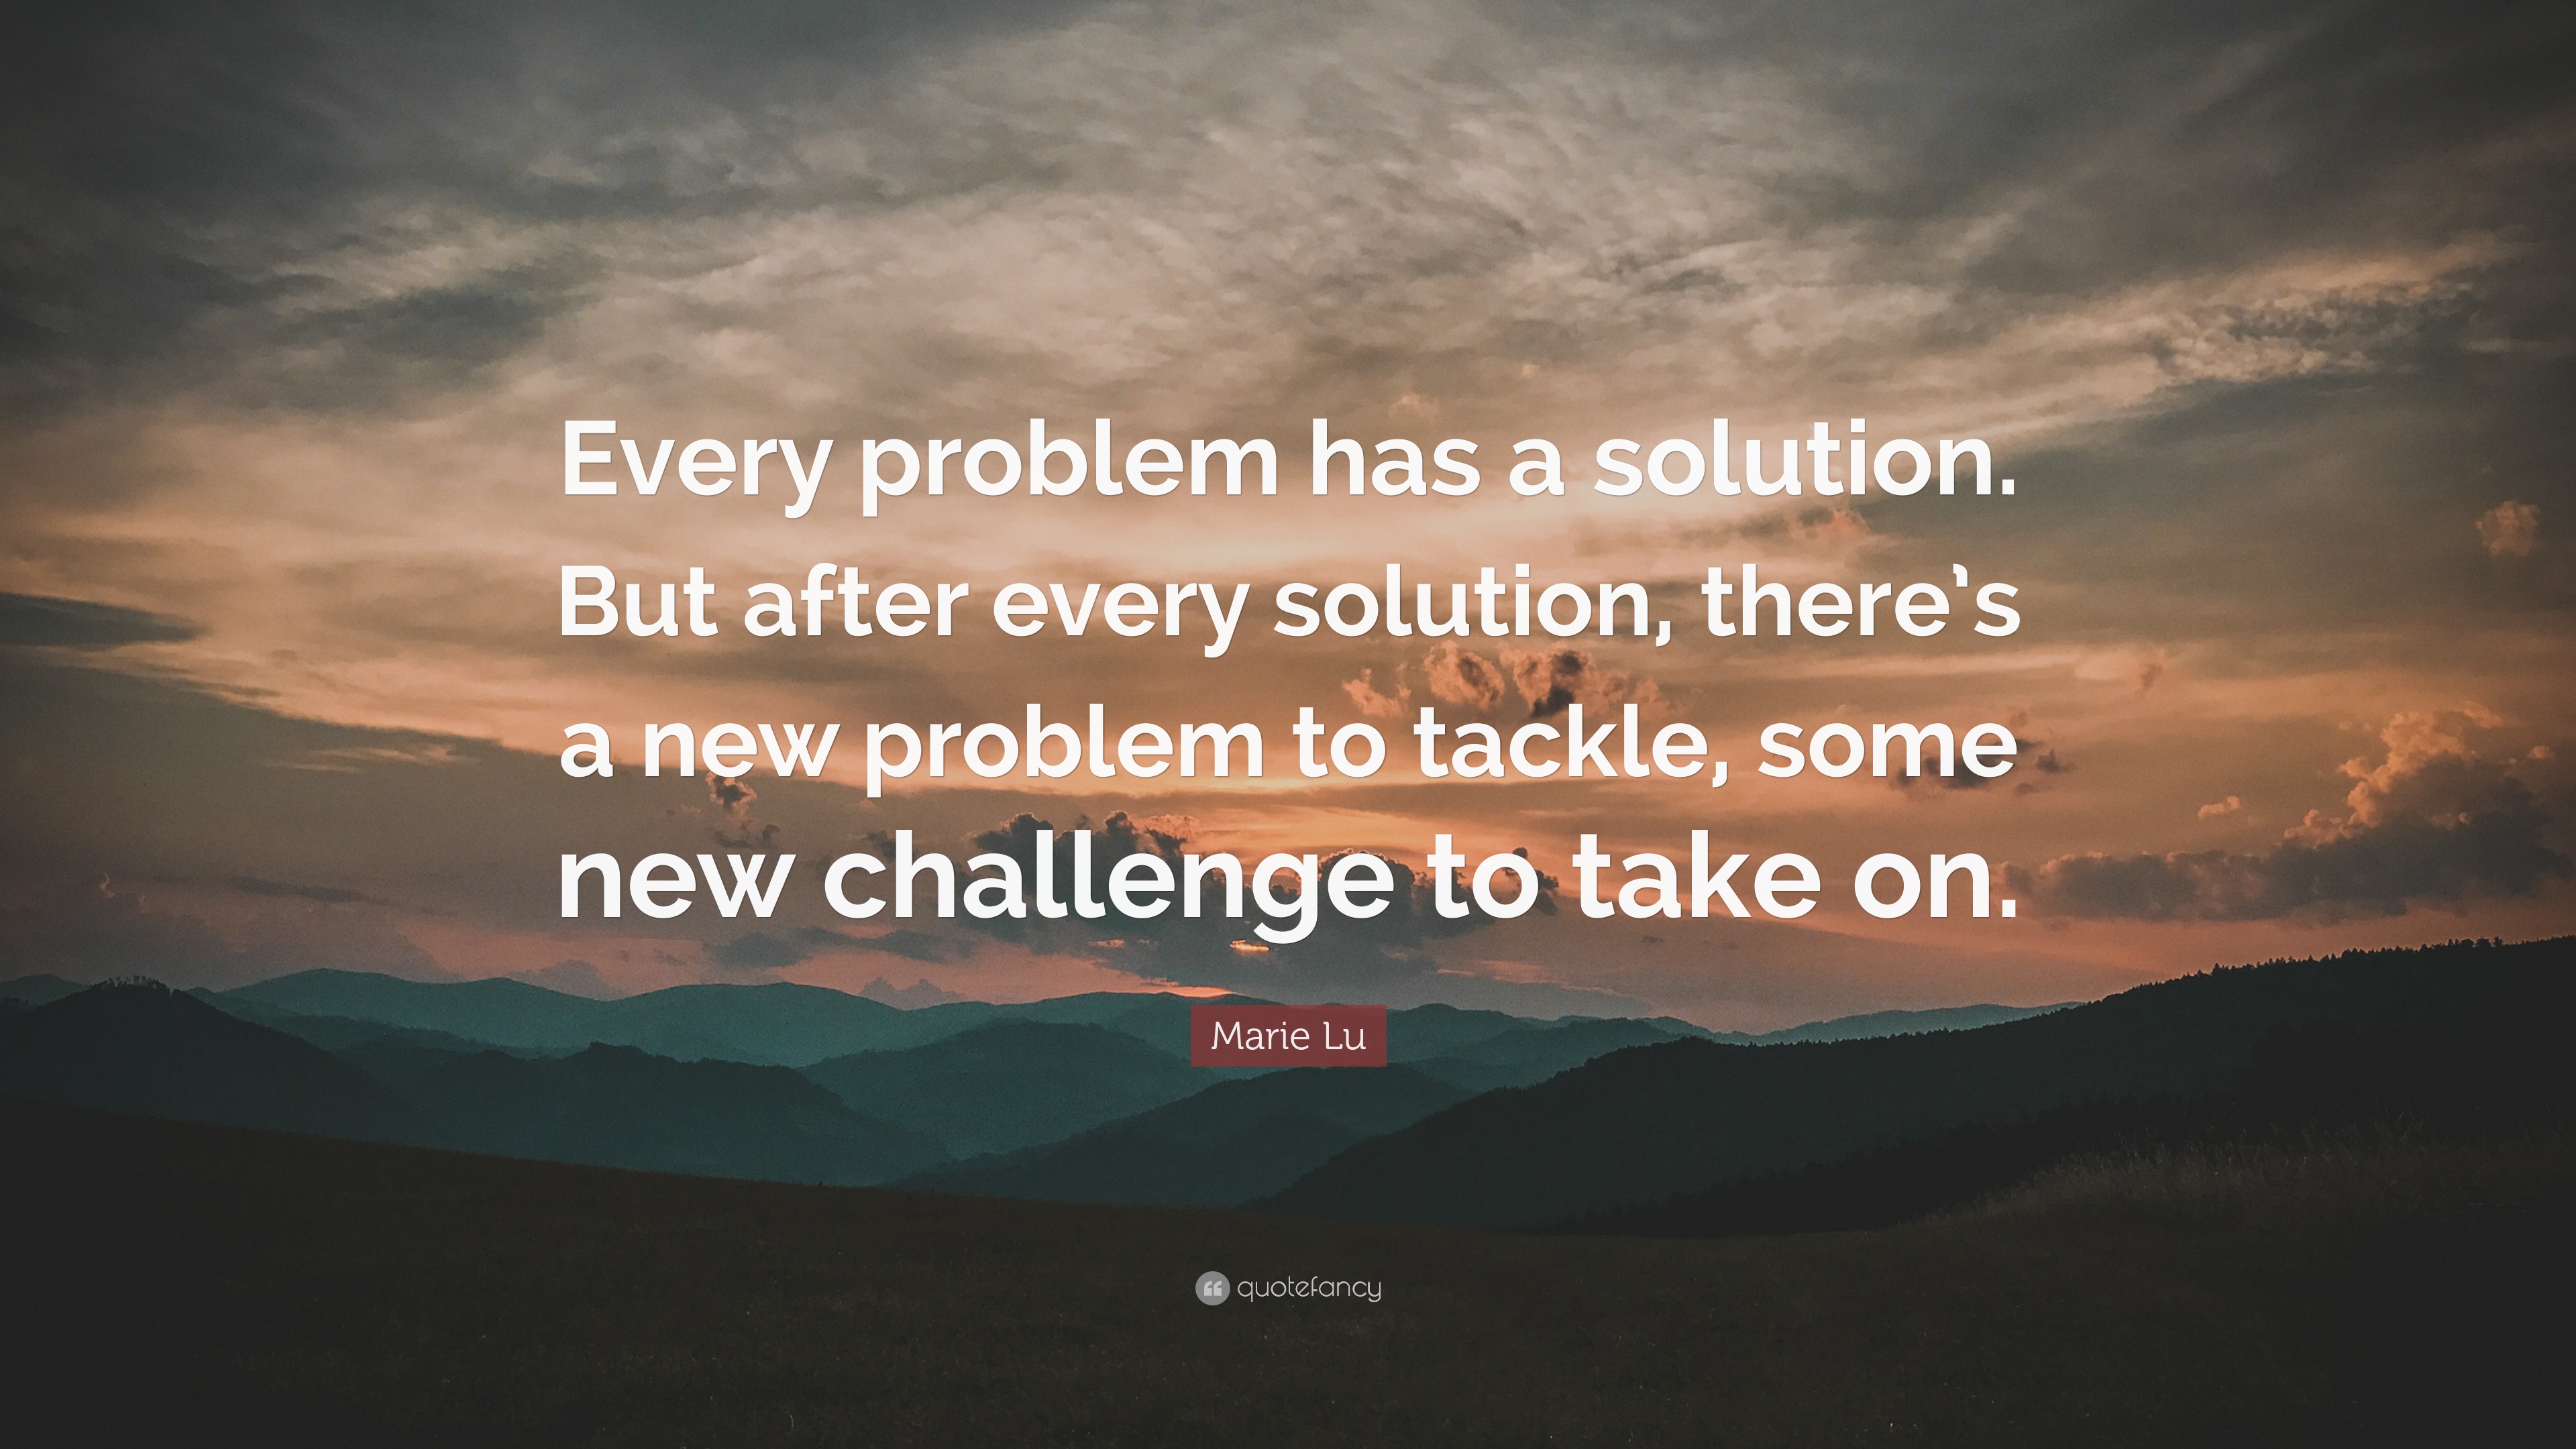 Marie Lu Quote: “Every problem has a solution. But after every solution,  there's a new problem